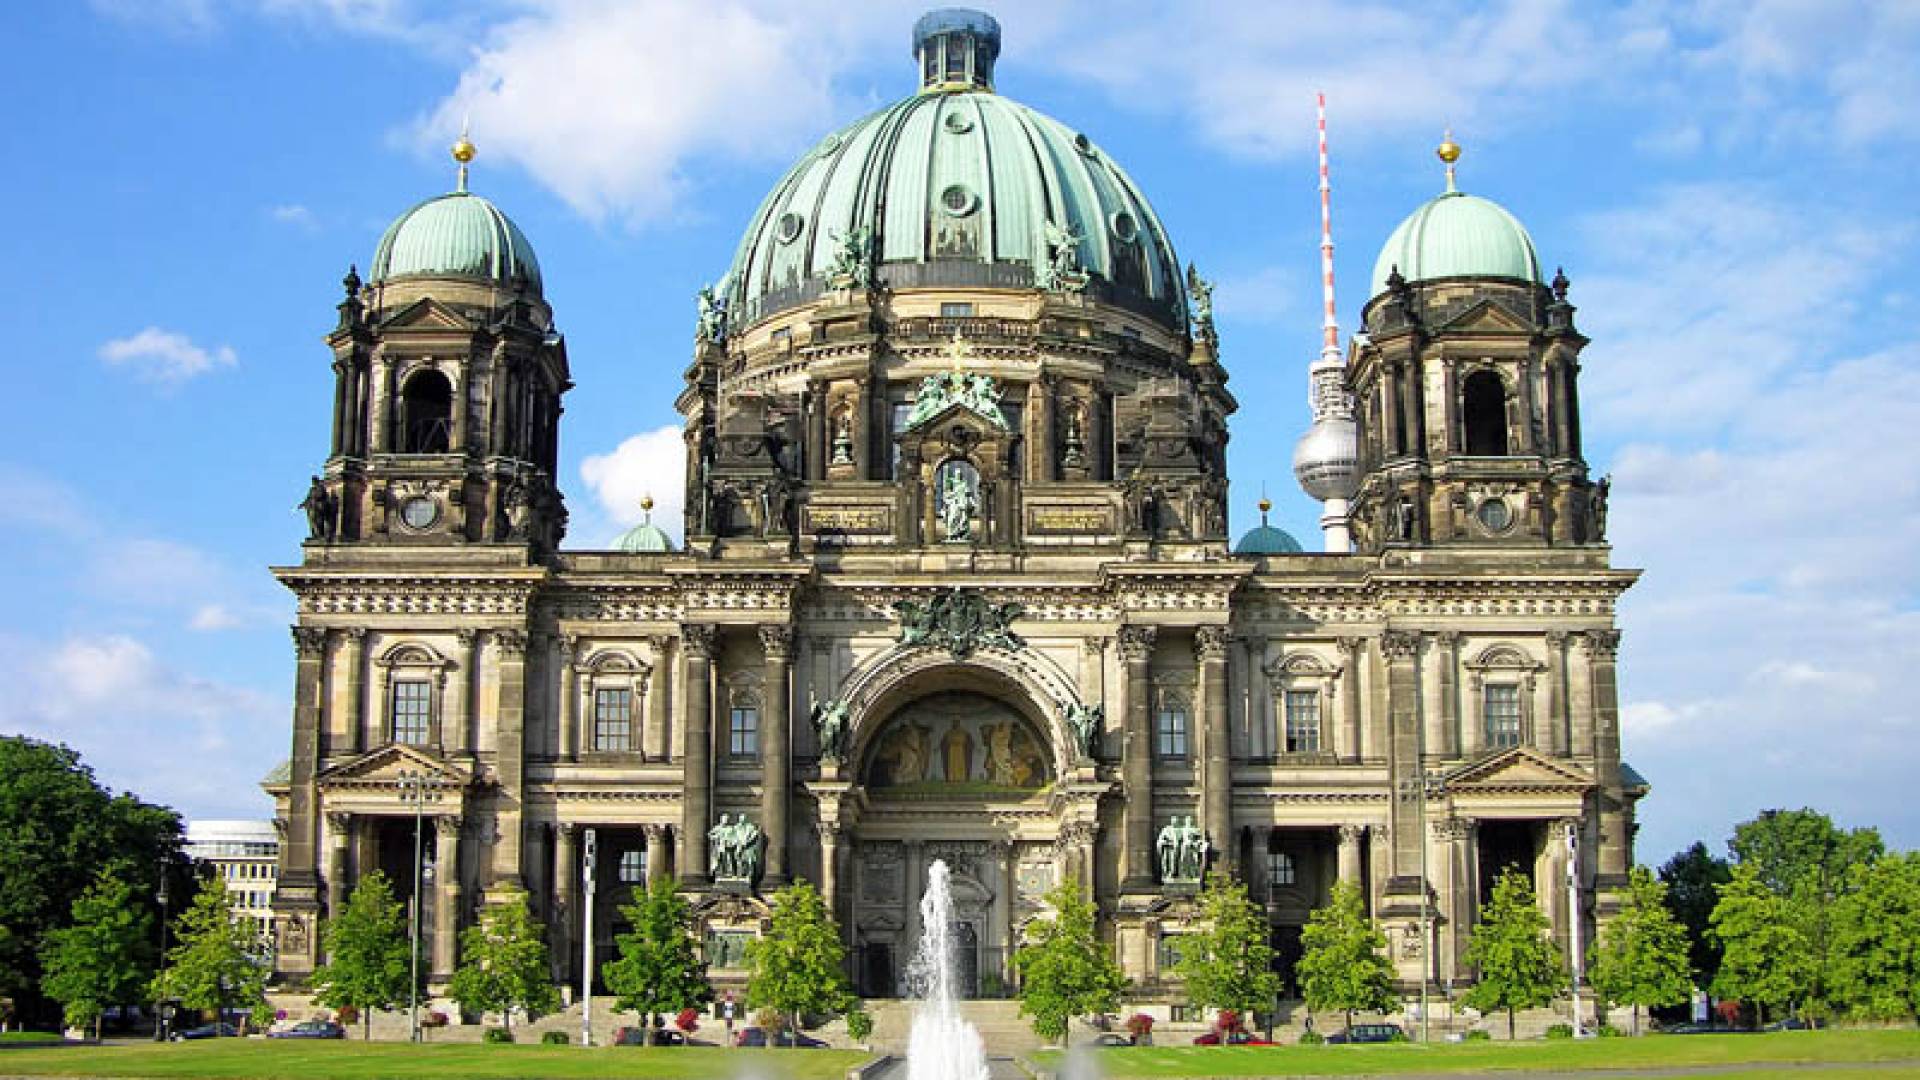 MUSEUM ISLAND, Berlin Cathedral